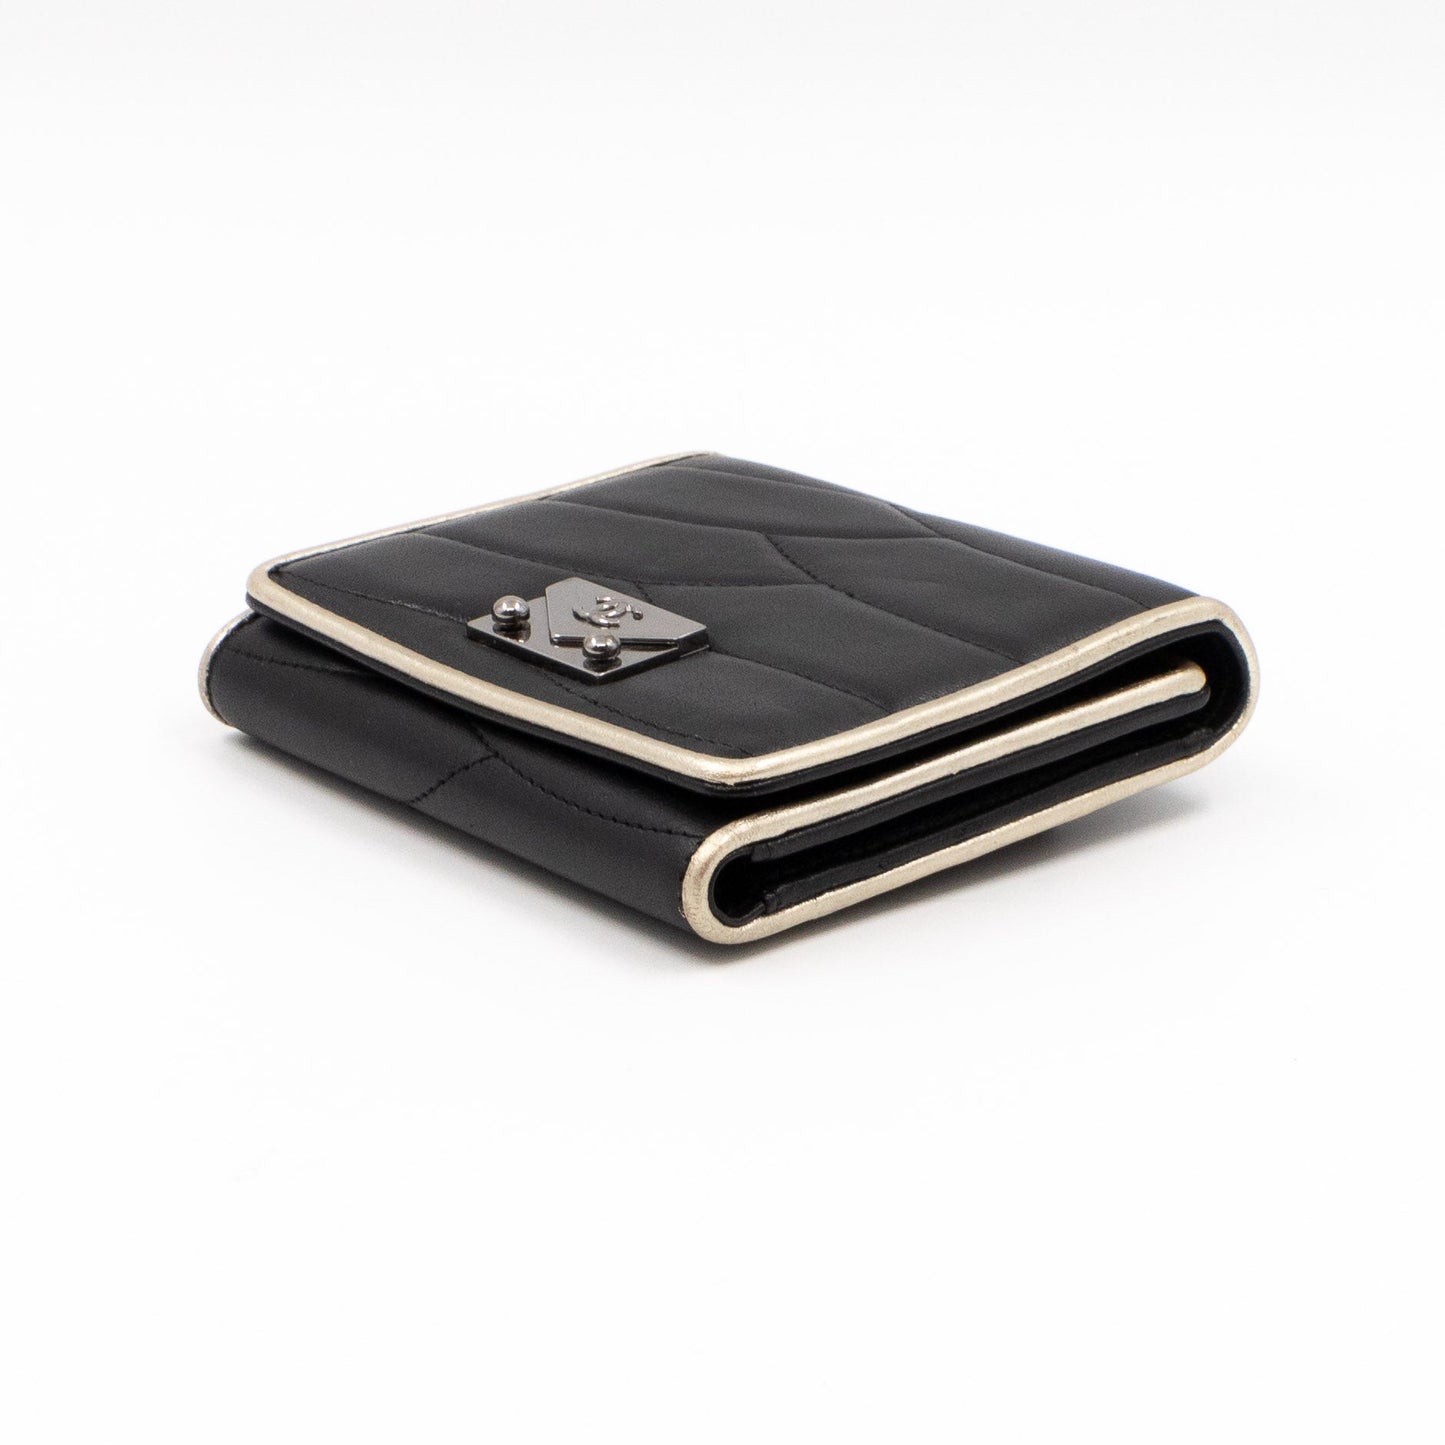 Pagoda Small Flap Wallet Black Leather